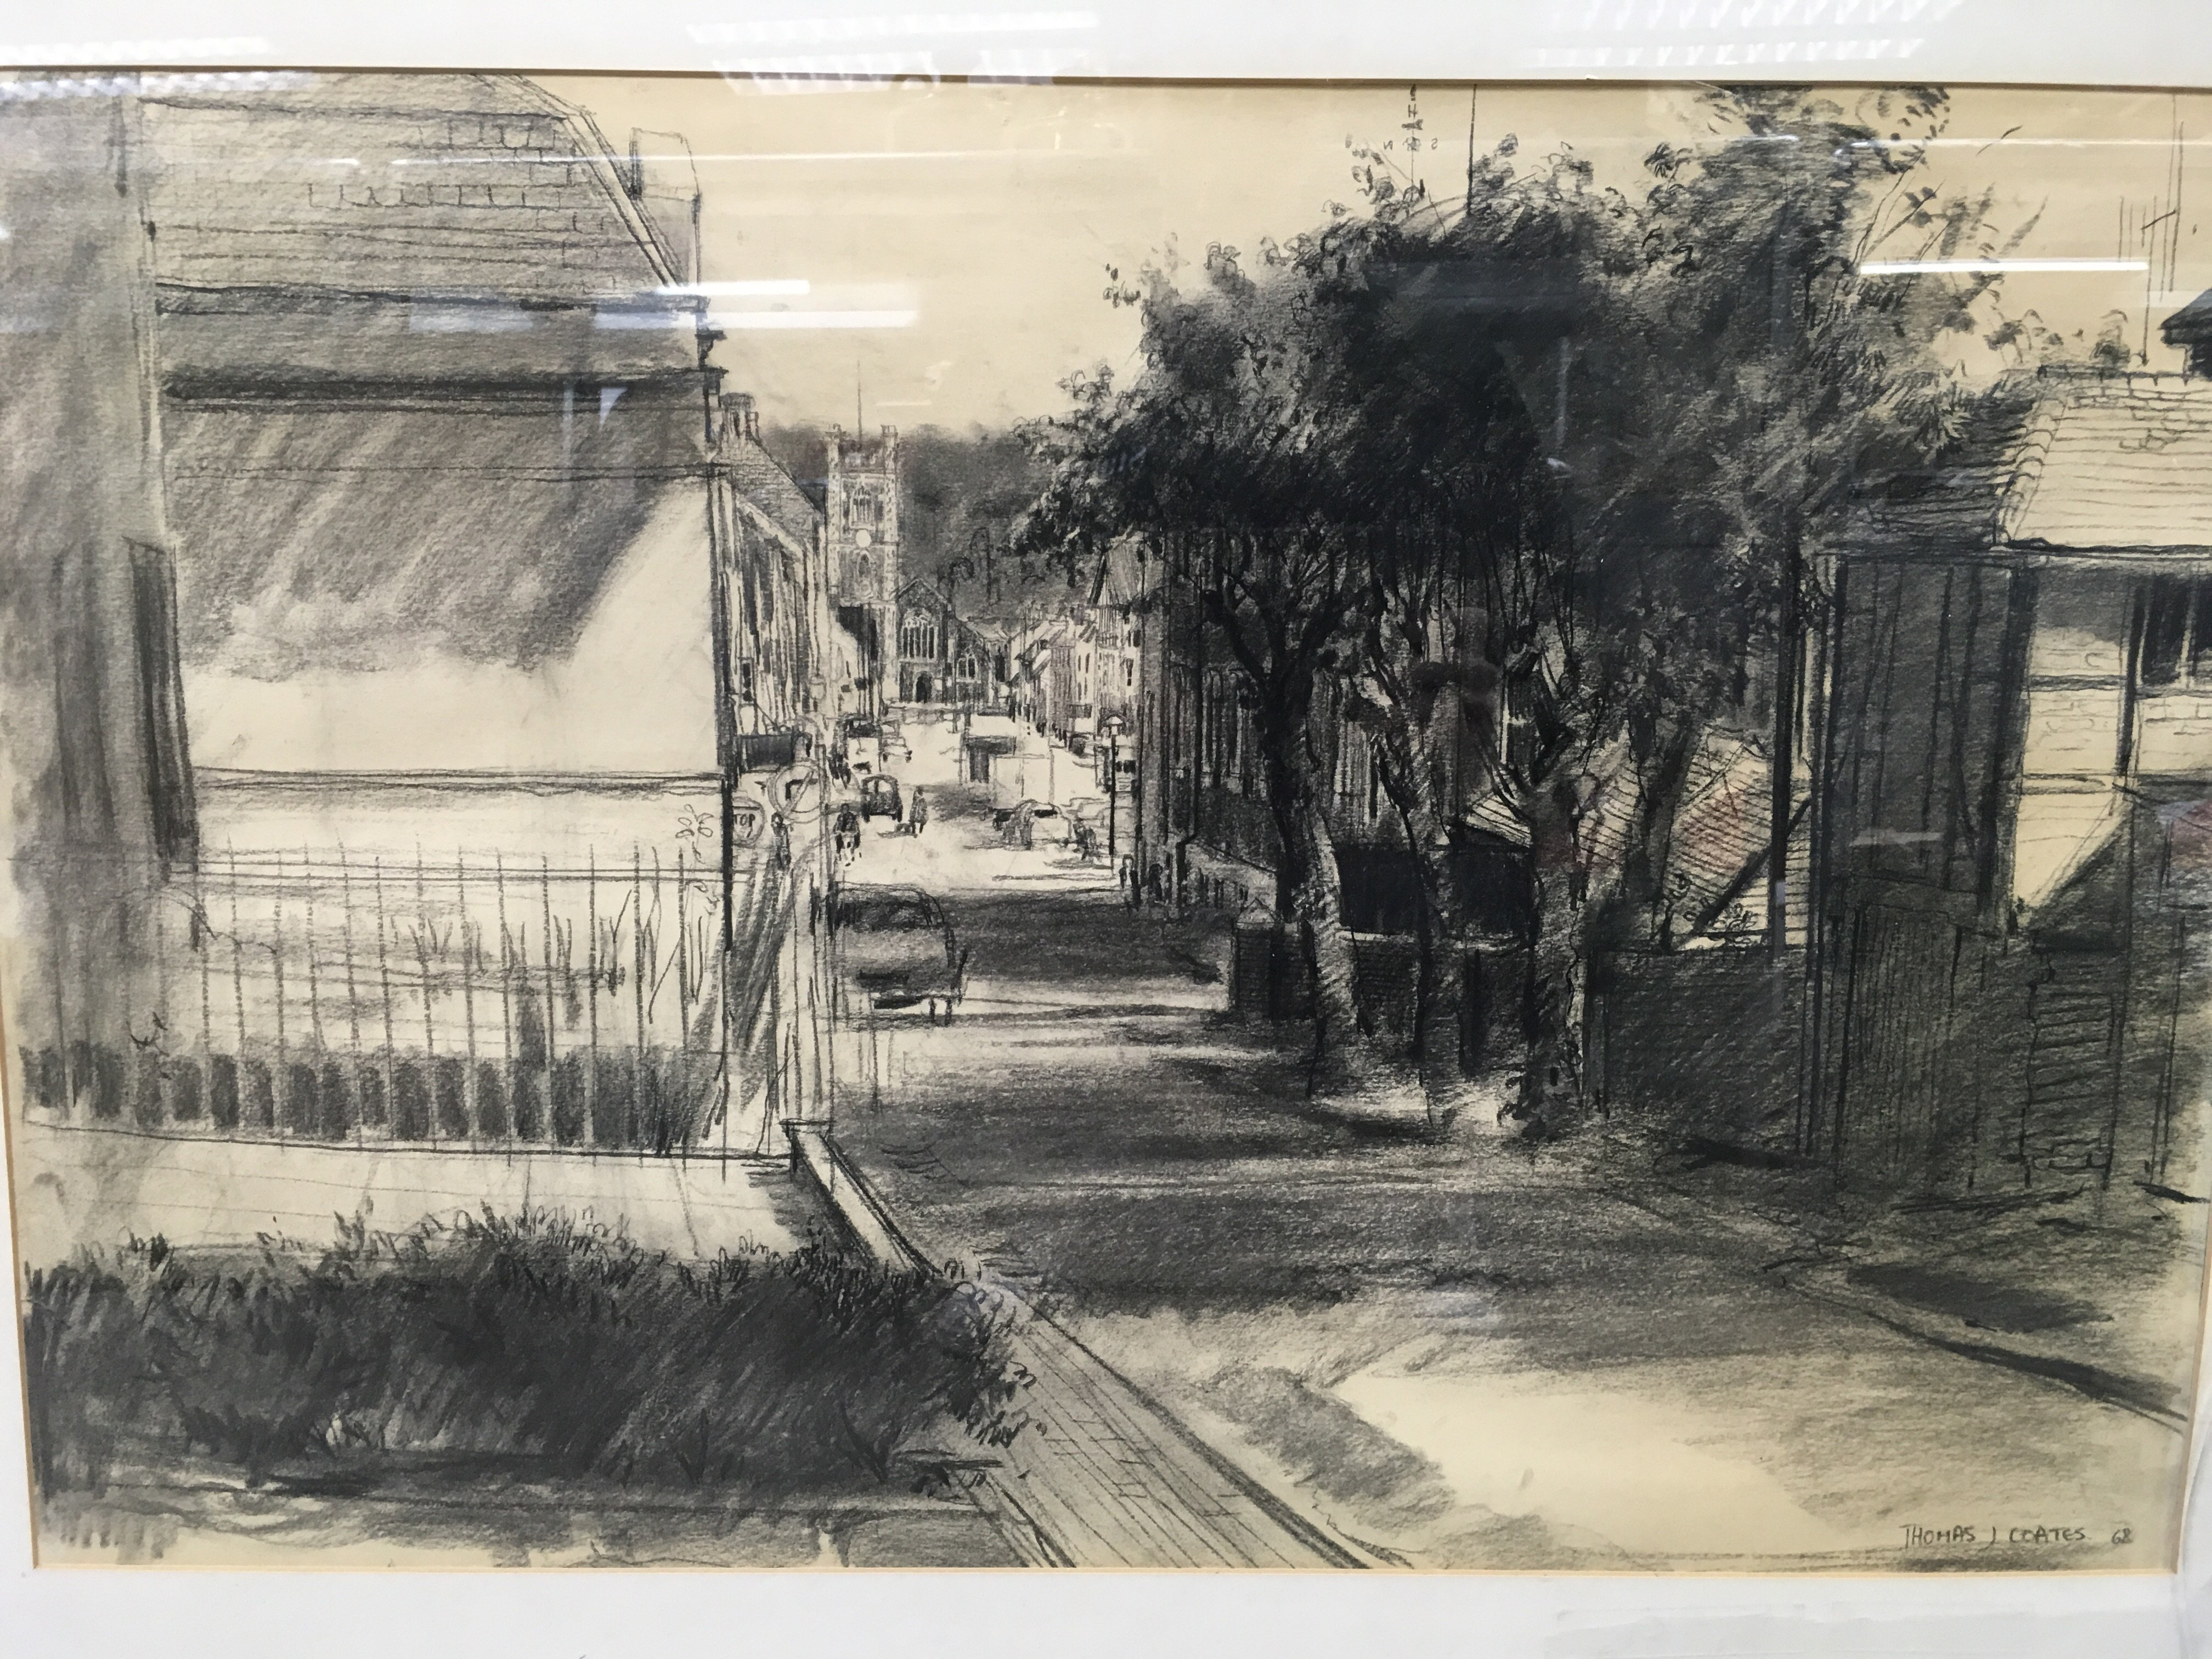 A large framed charcoal sketch by Thomas J Coates